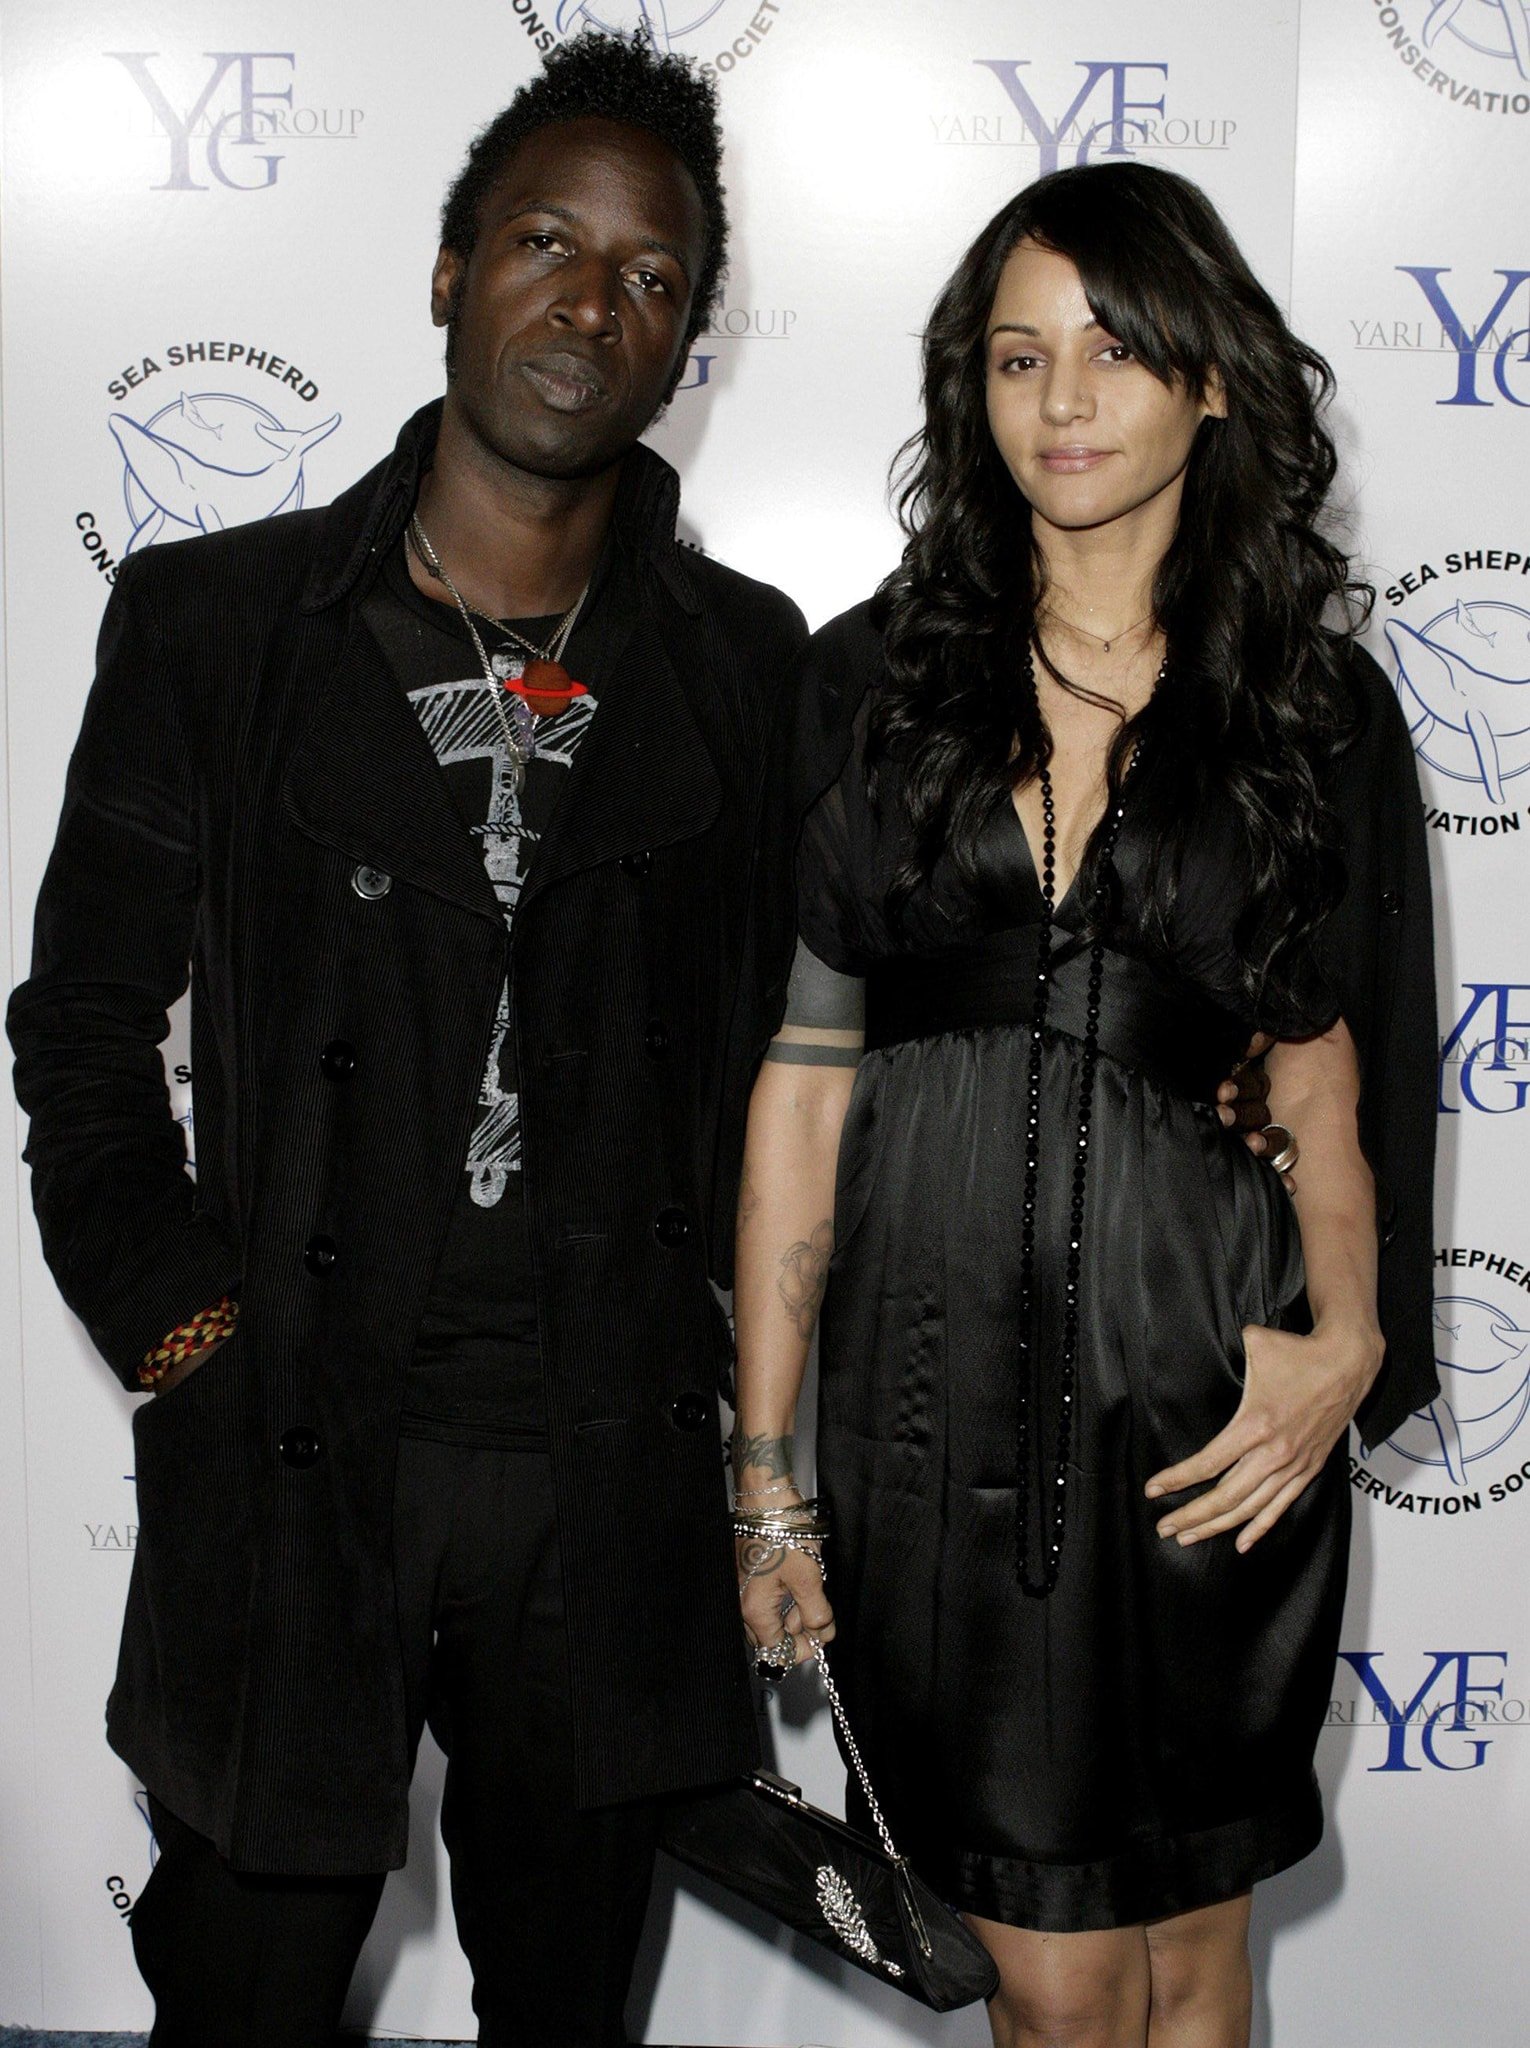 Persia White married rapper Saul Williams in 2008 after a five-year relationship but split in 2009